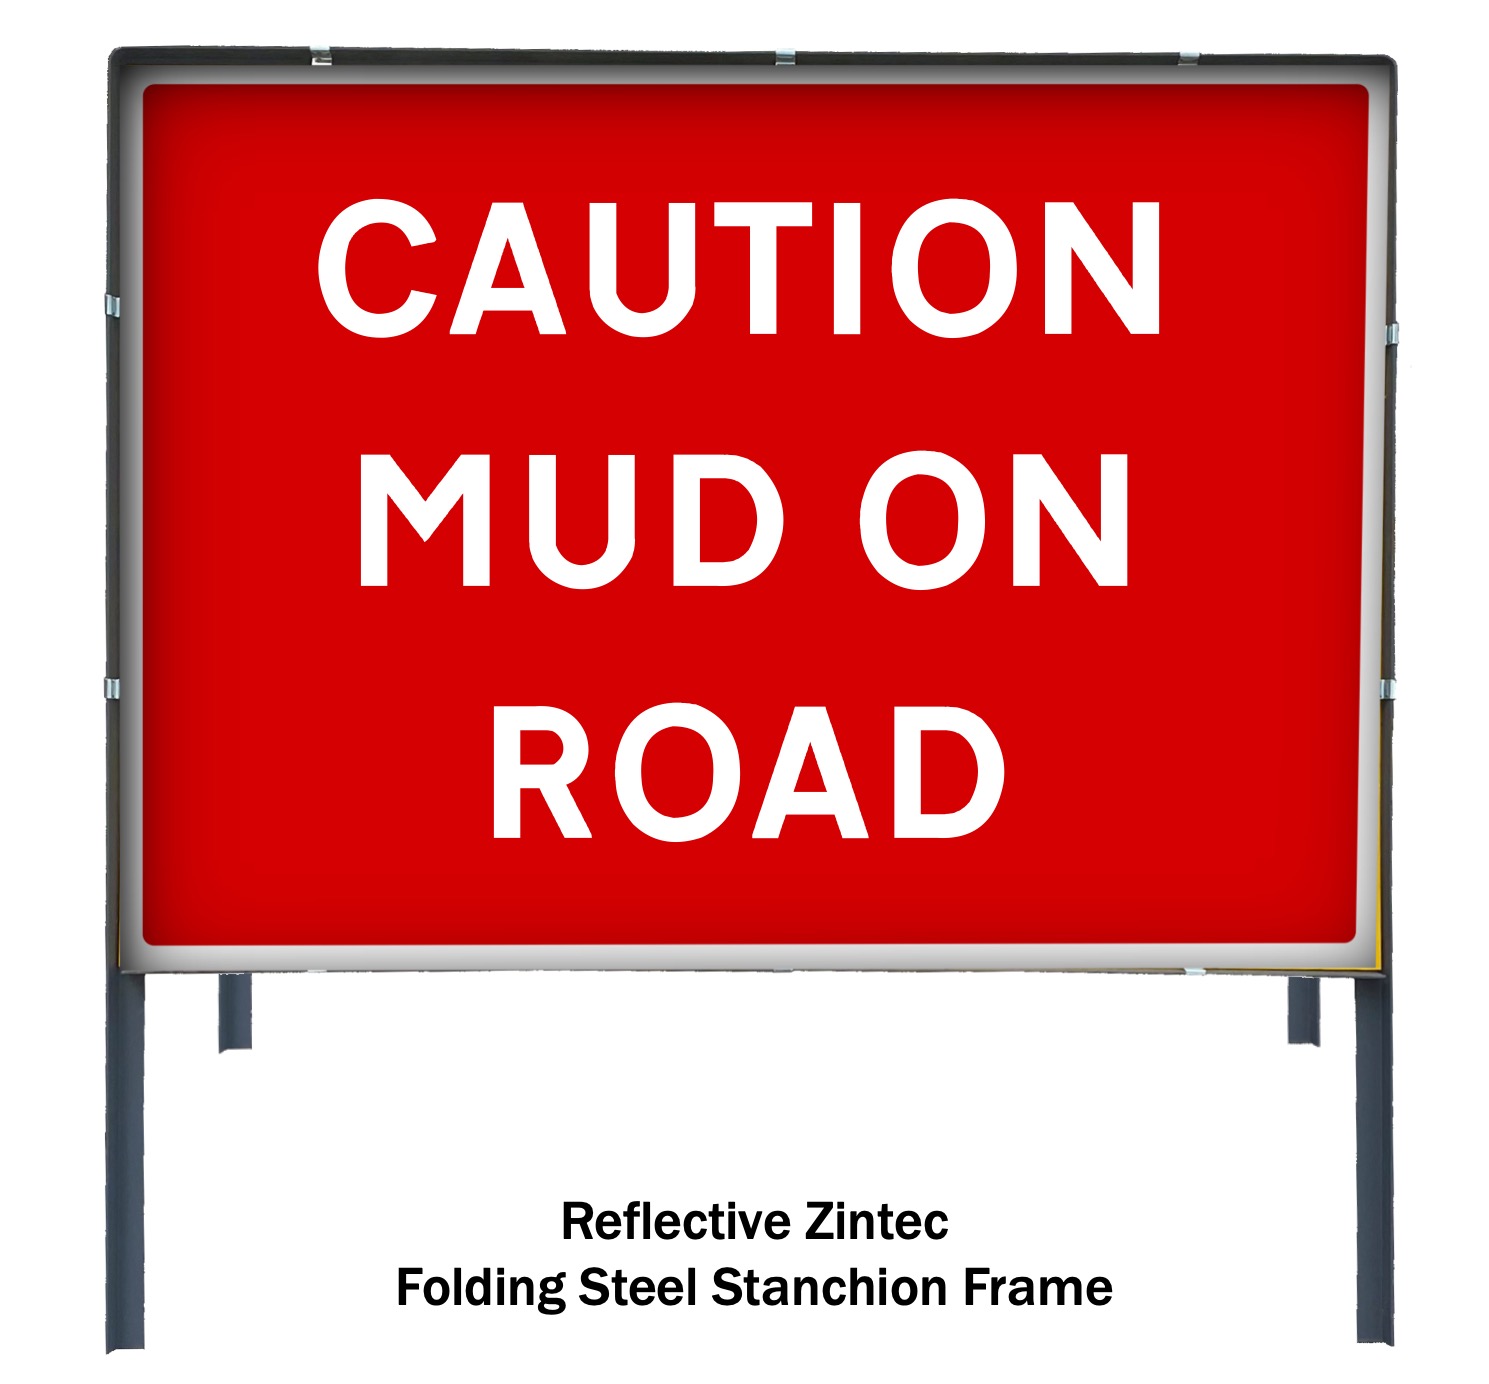 Plastic Temporary Road Street Traffic Safety Sign for Road and Street Works Freestanding with Reflective Sign Face Mud On Road 600x450mm Road Sign